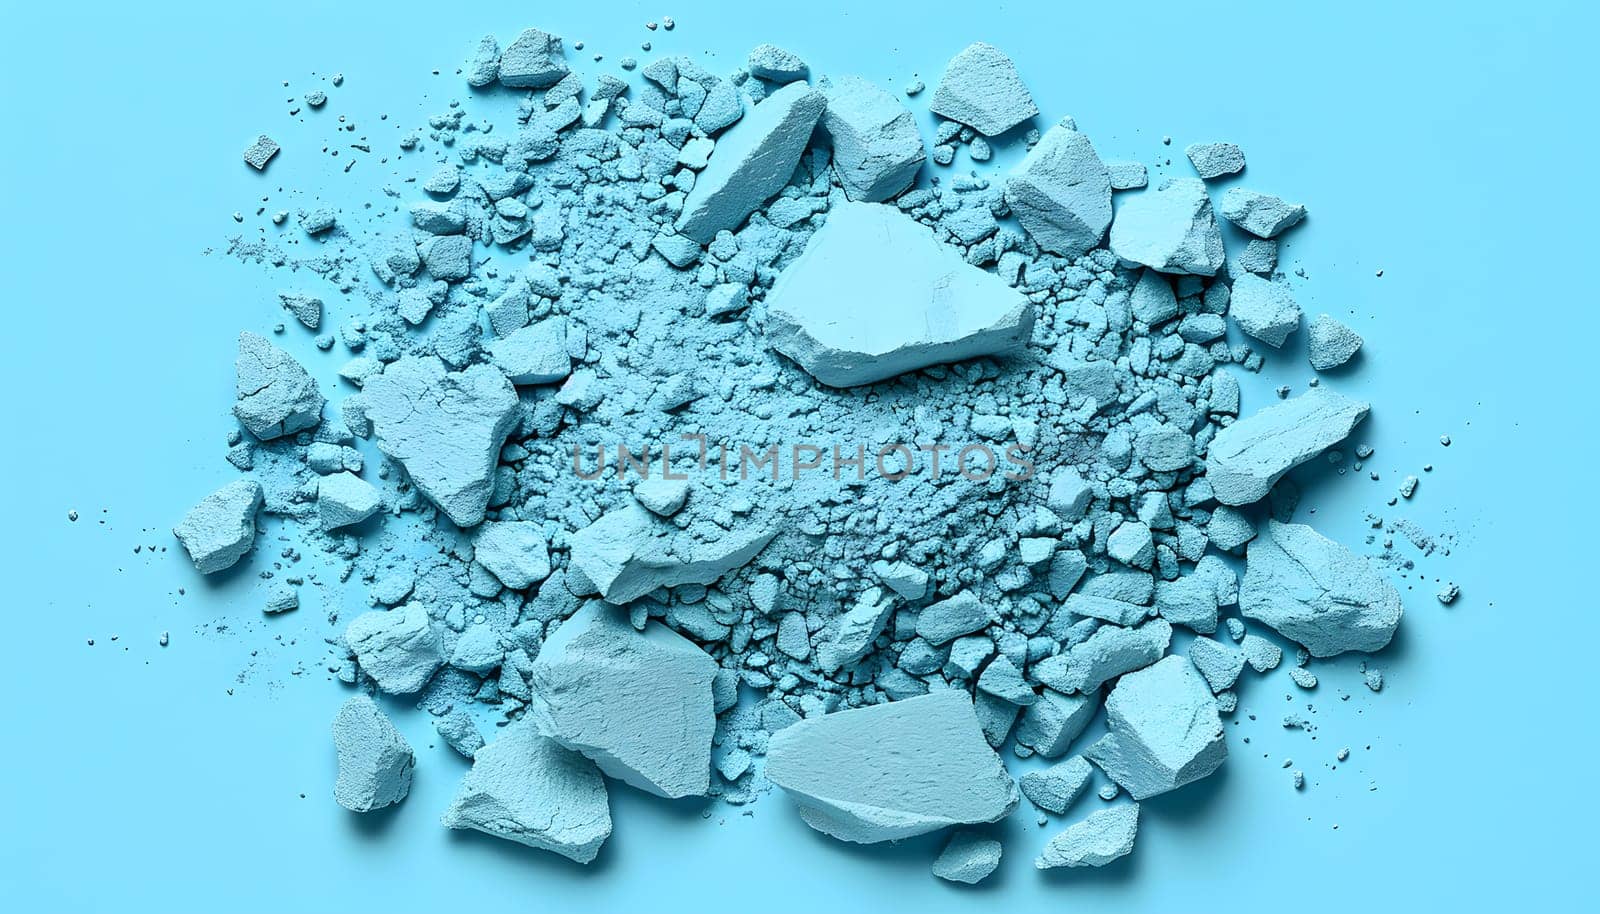 A stack of shattered rocks on an electric blue surface by Nadtochiy